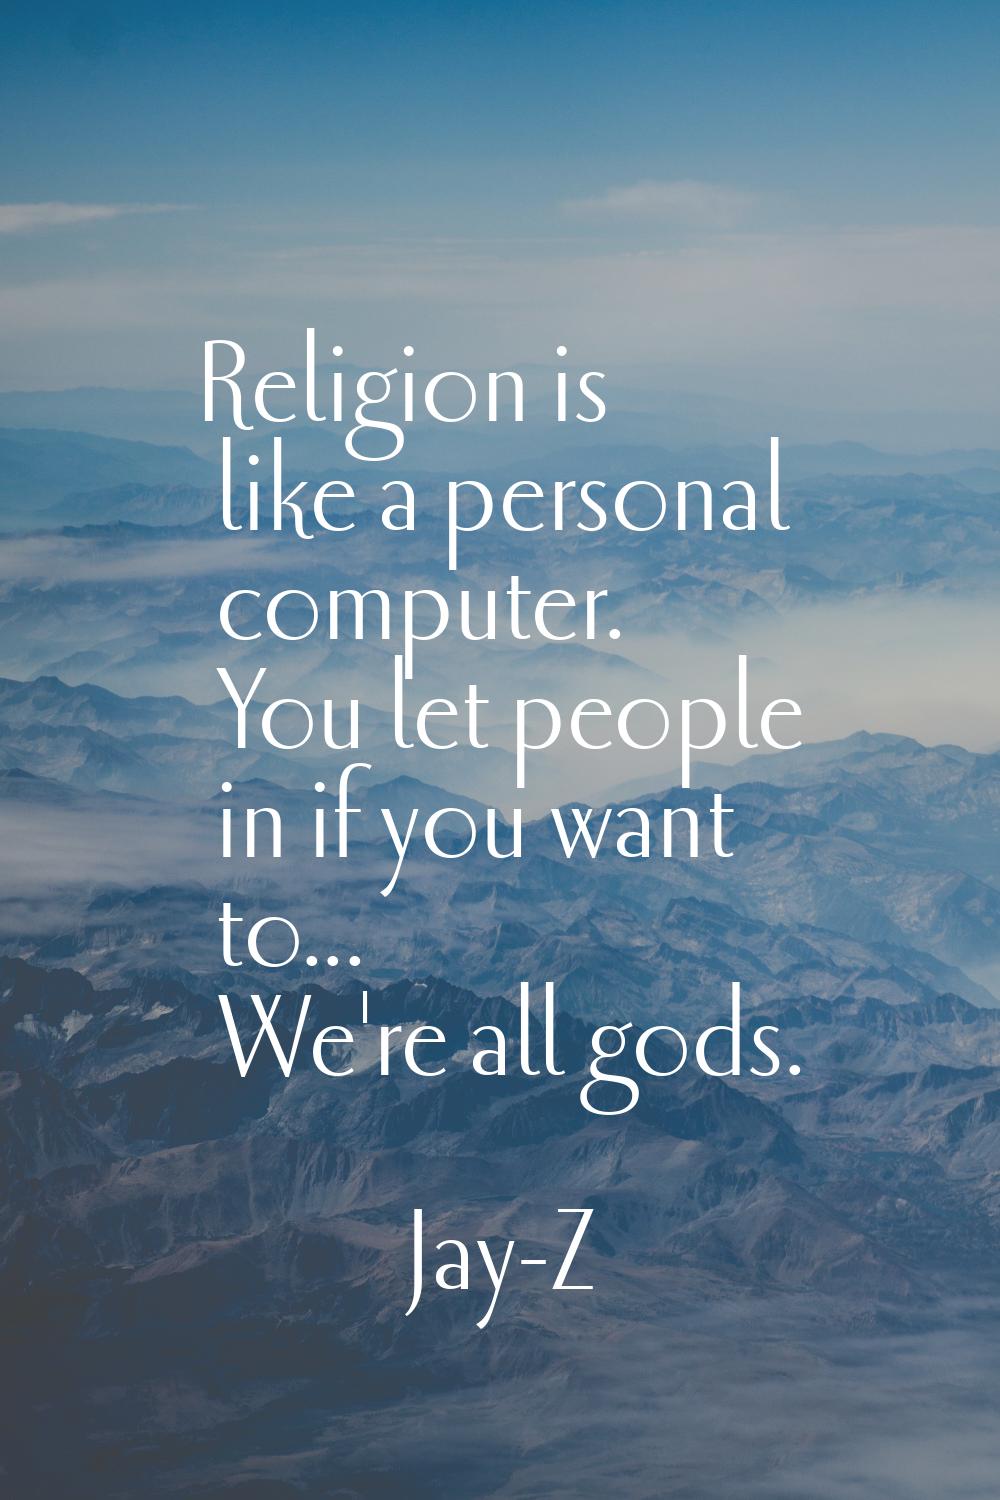 Religion is like a personal computer. You let people in if you want to... We're all gods.